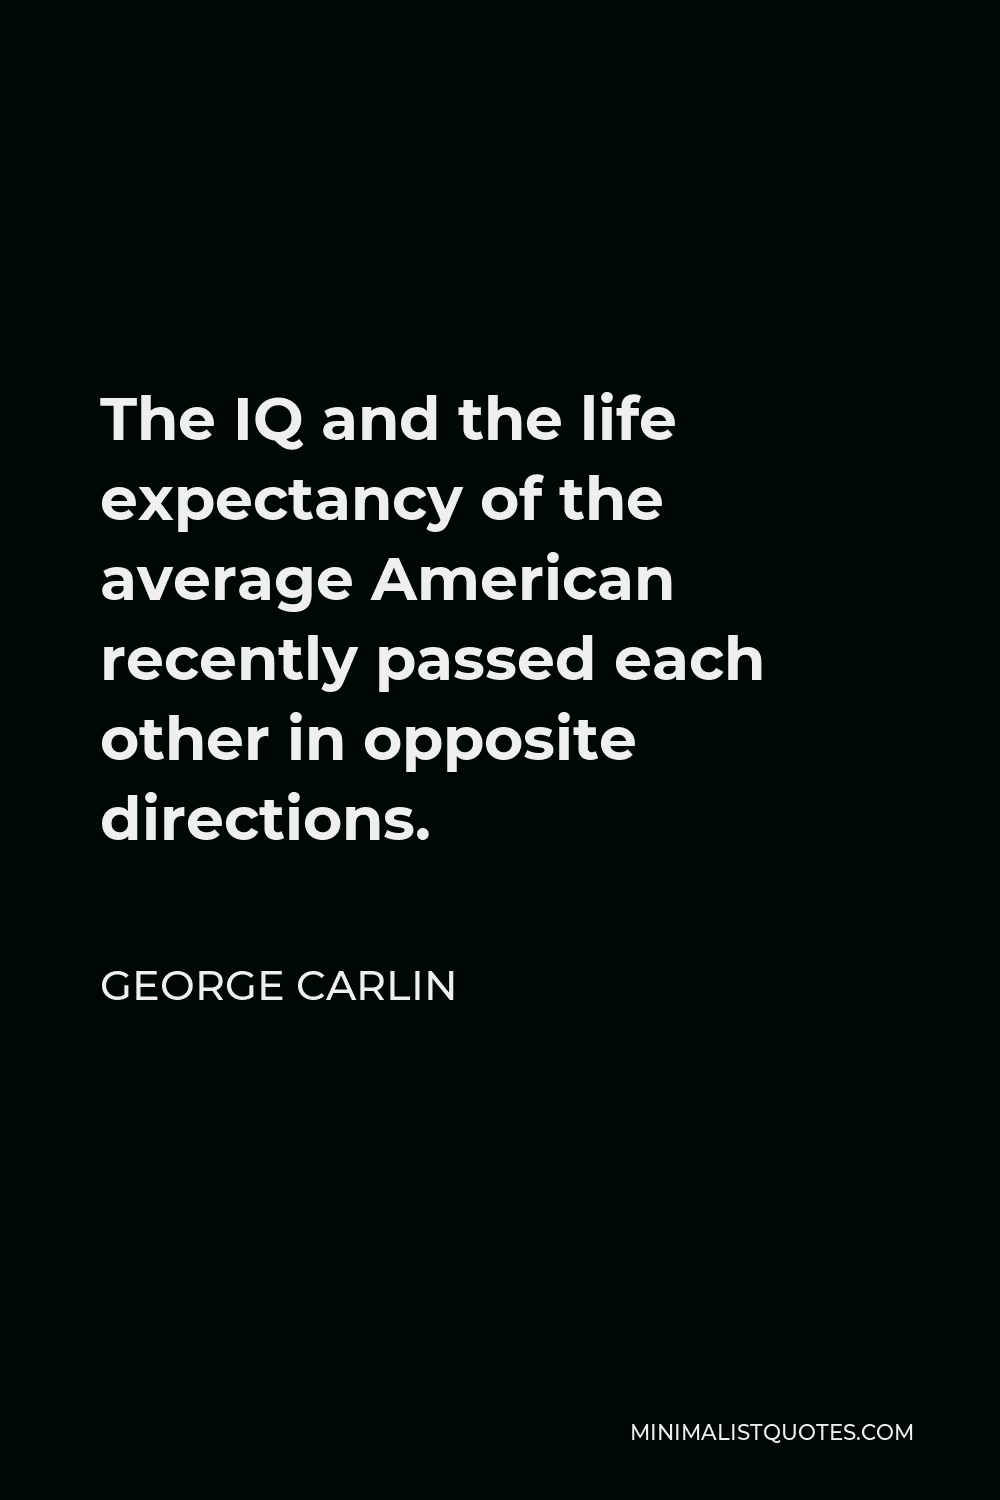 George Carlin Quote - The IQ and the life expectancy of the average American recently passed each other in opposite directions.